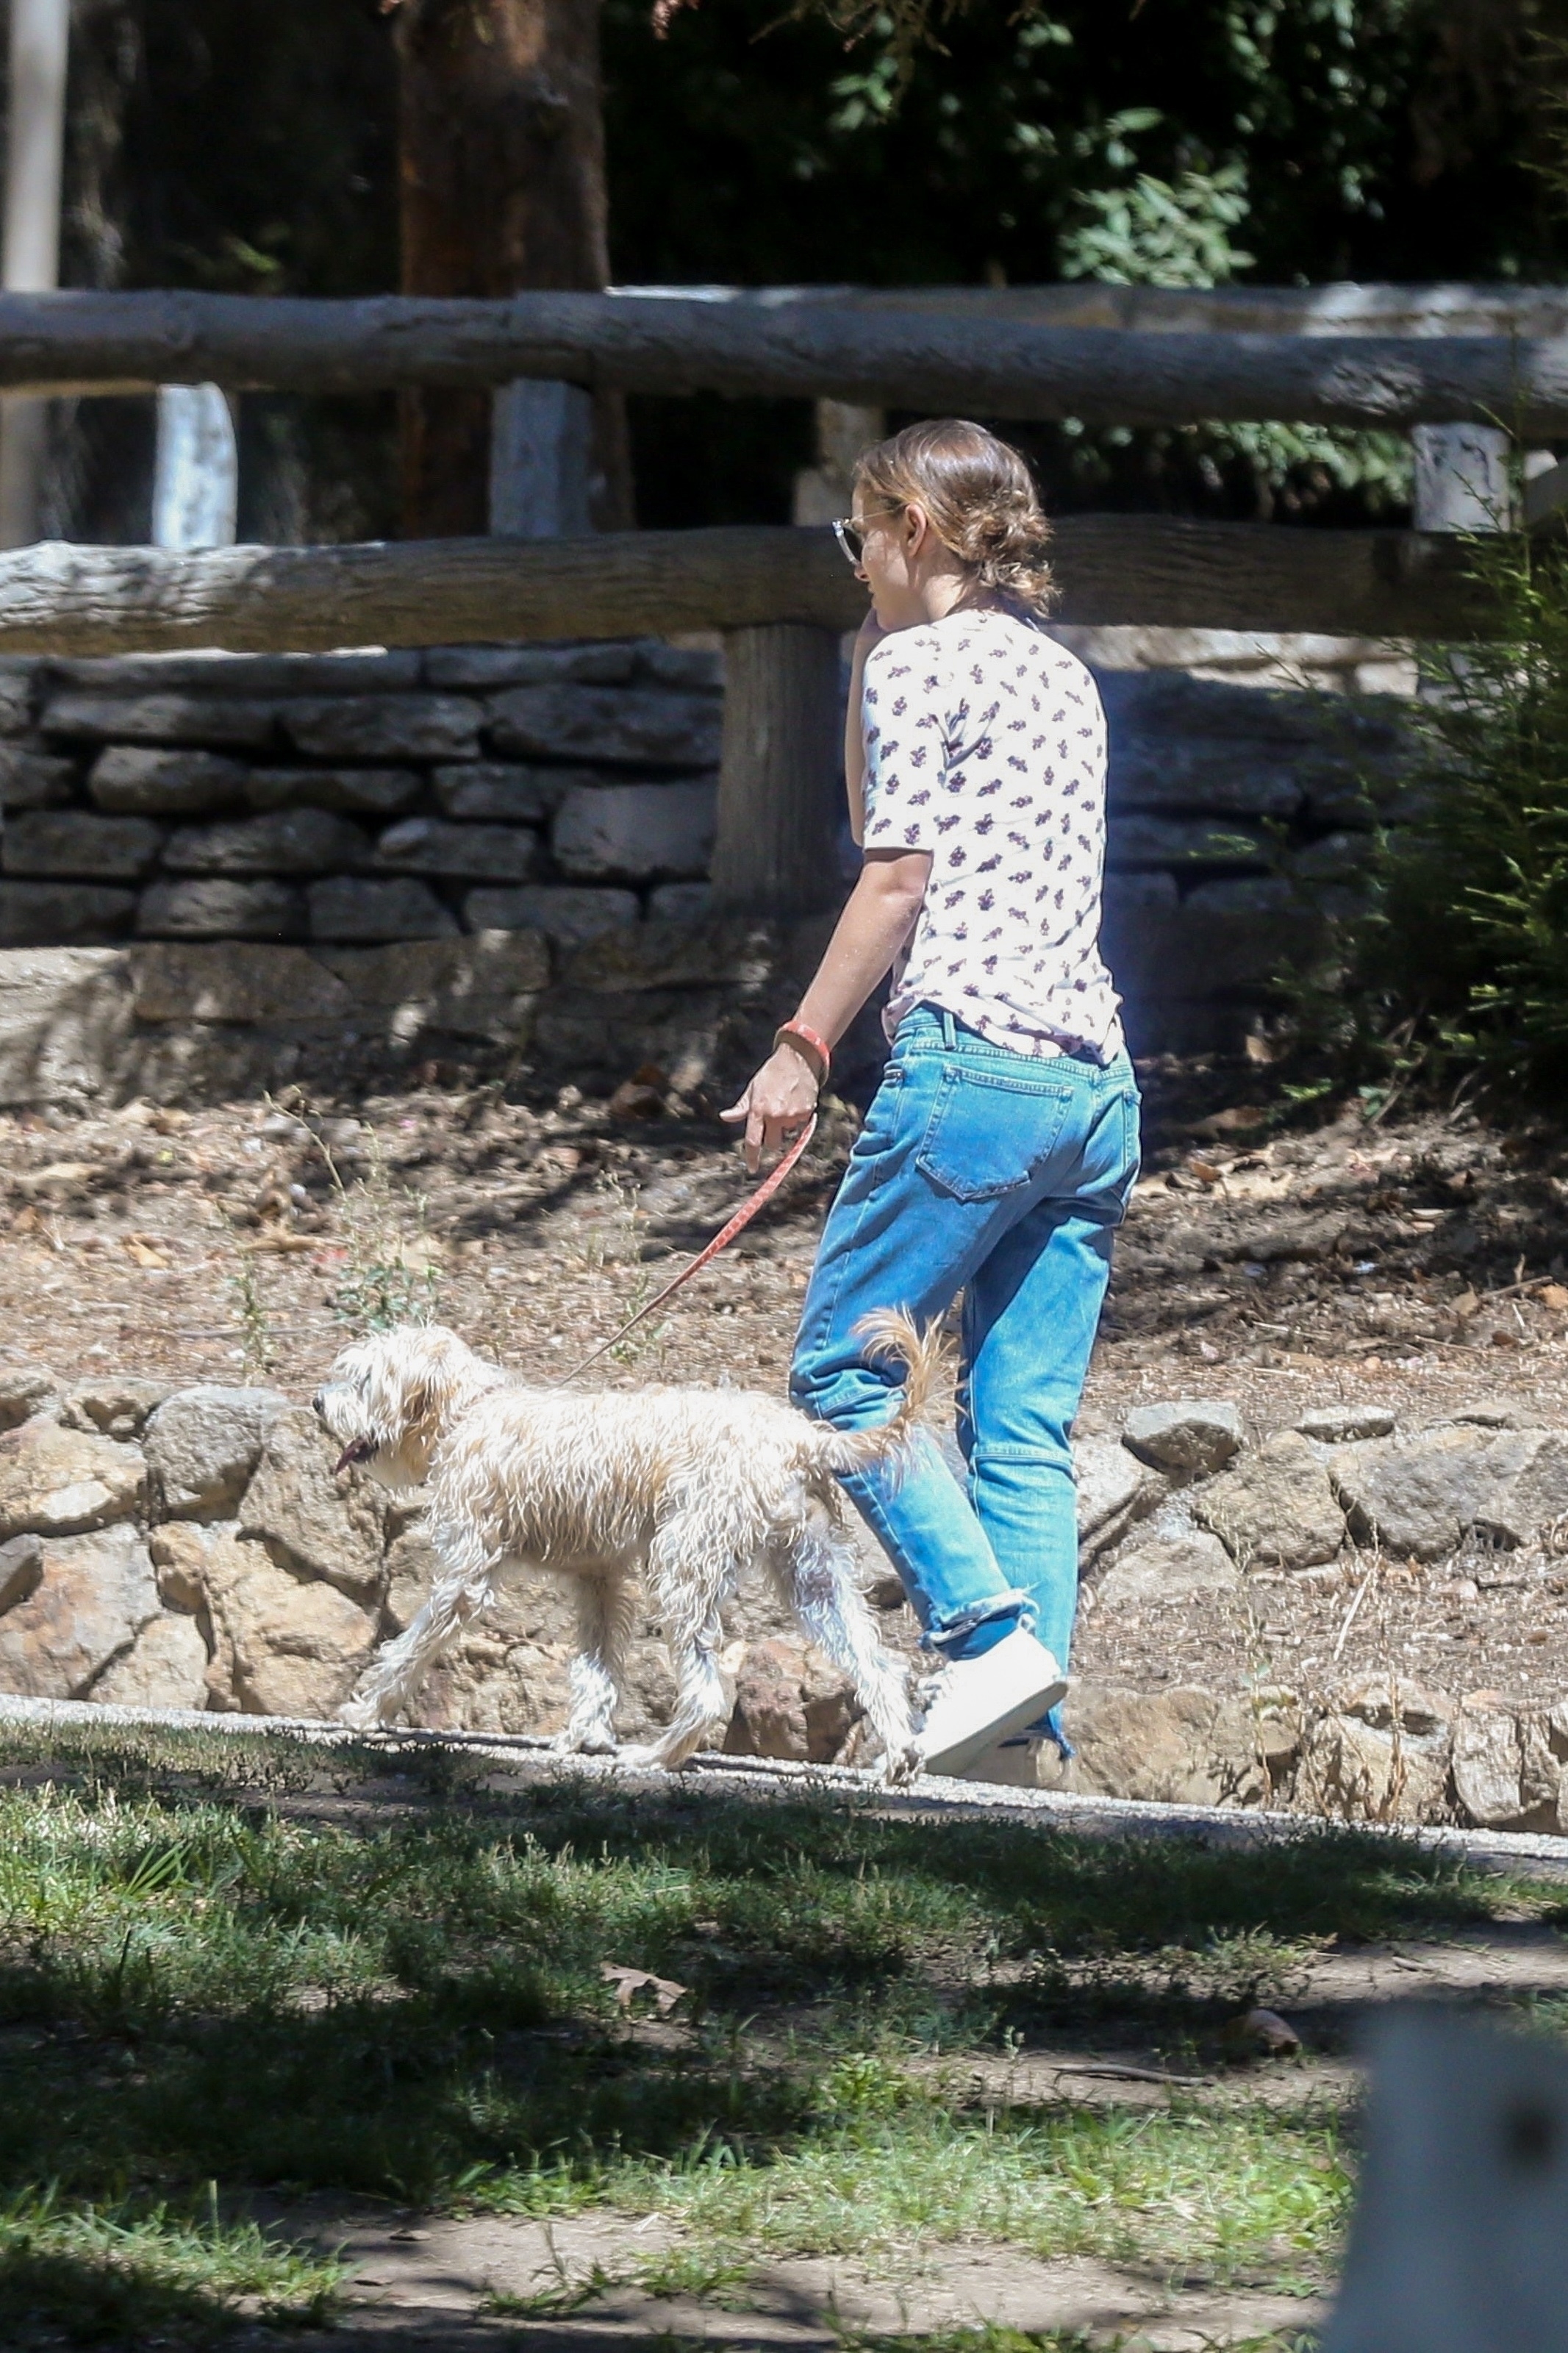 natalie-portman-out-for-a-walk-with-her-dog-near-griffith-park-in-los-feliz-09172018-23.jpg